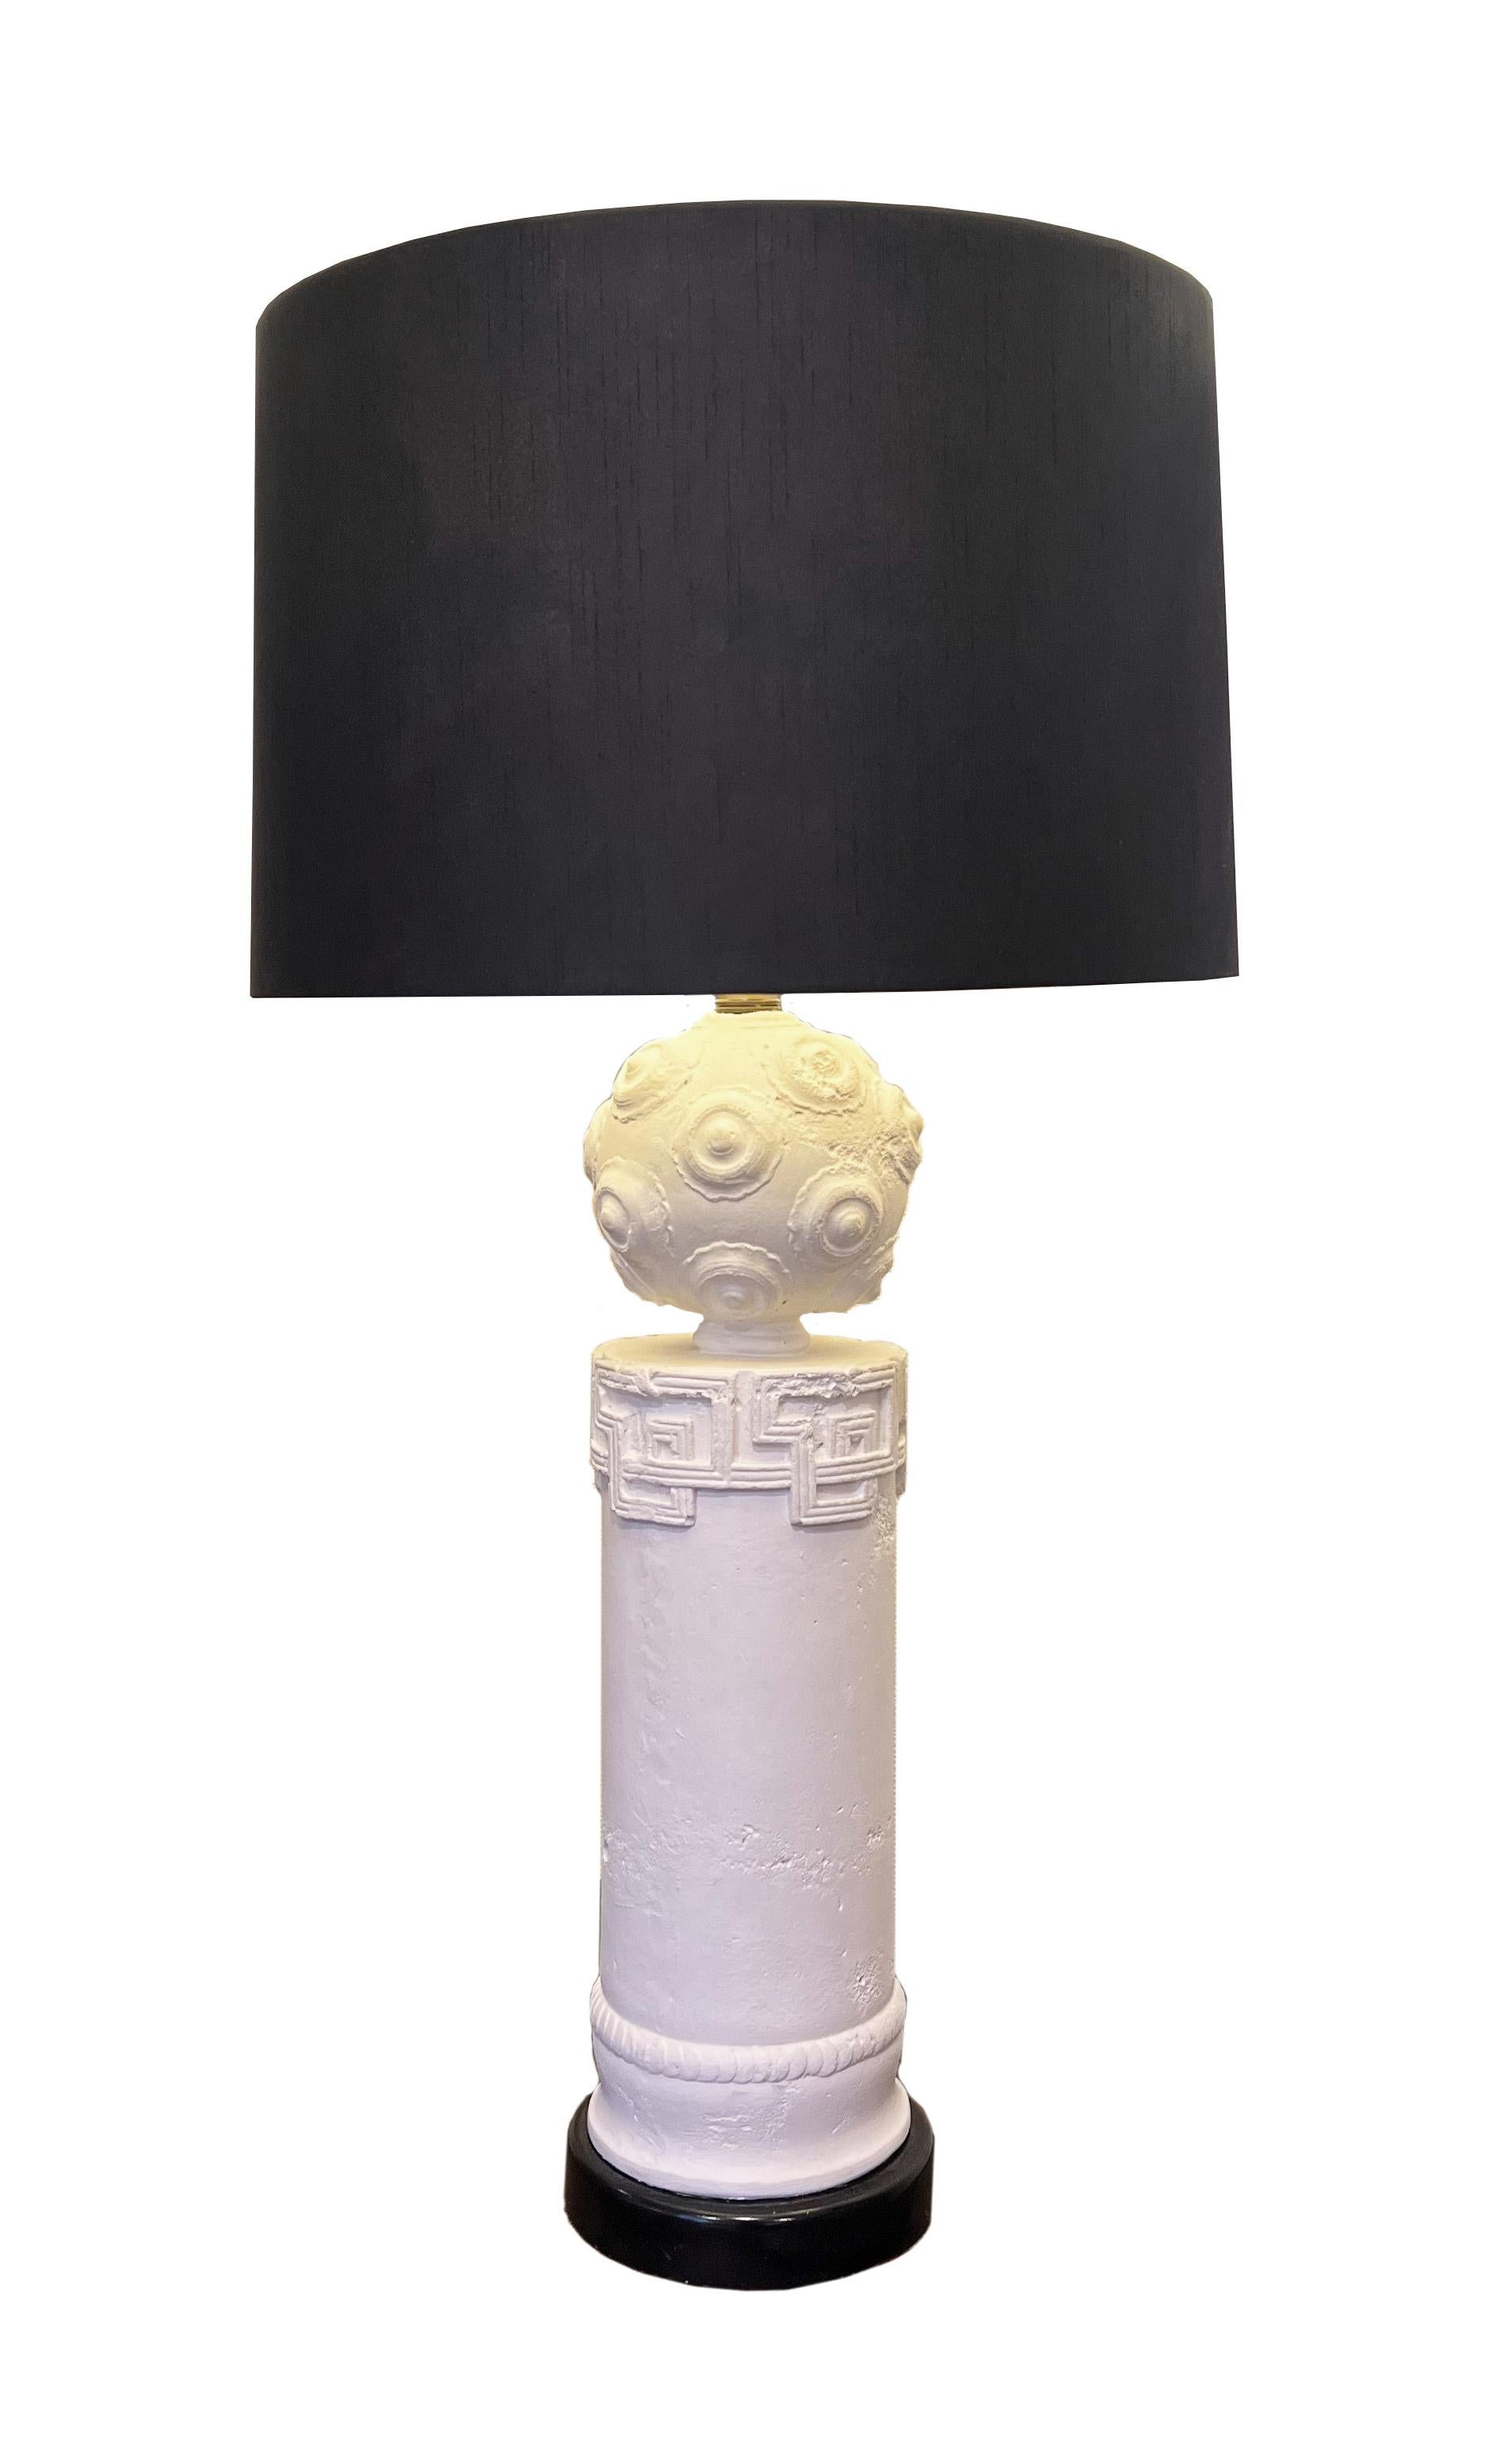 Pair of spectacular Mid-Century Modern table lamps. Hand-made plaster base with wood plinth & black silk shade.